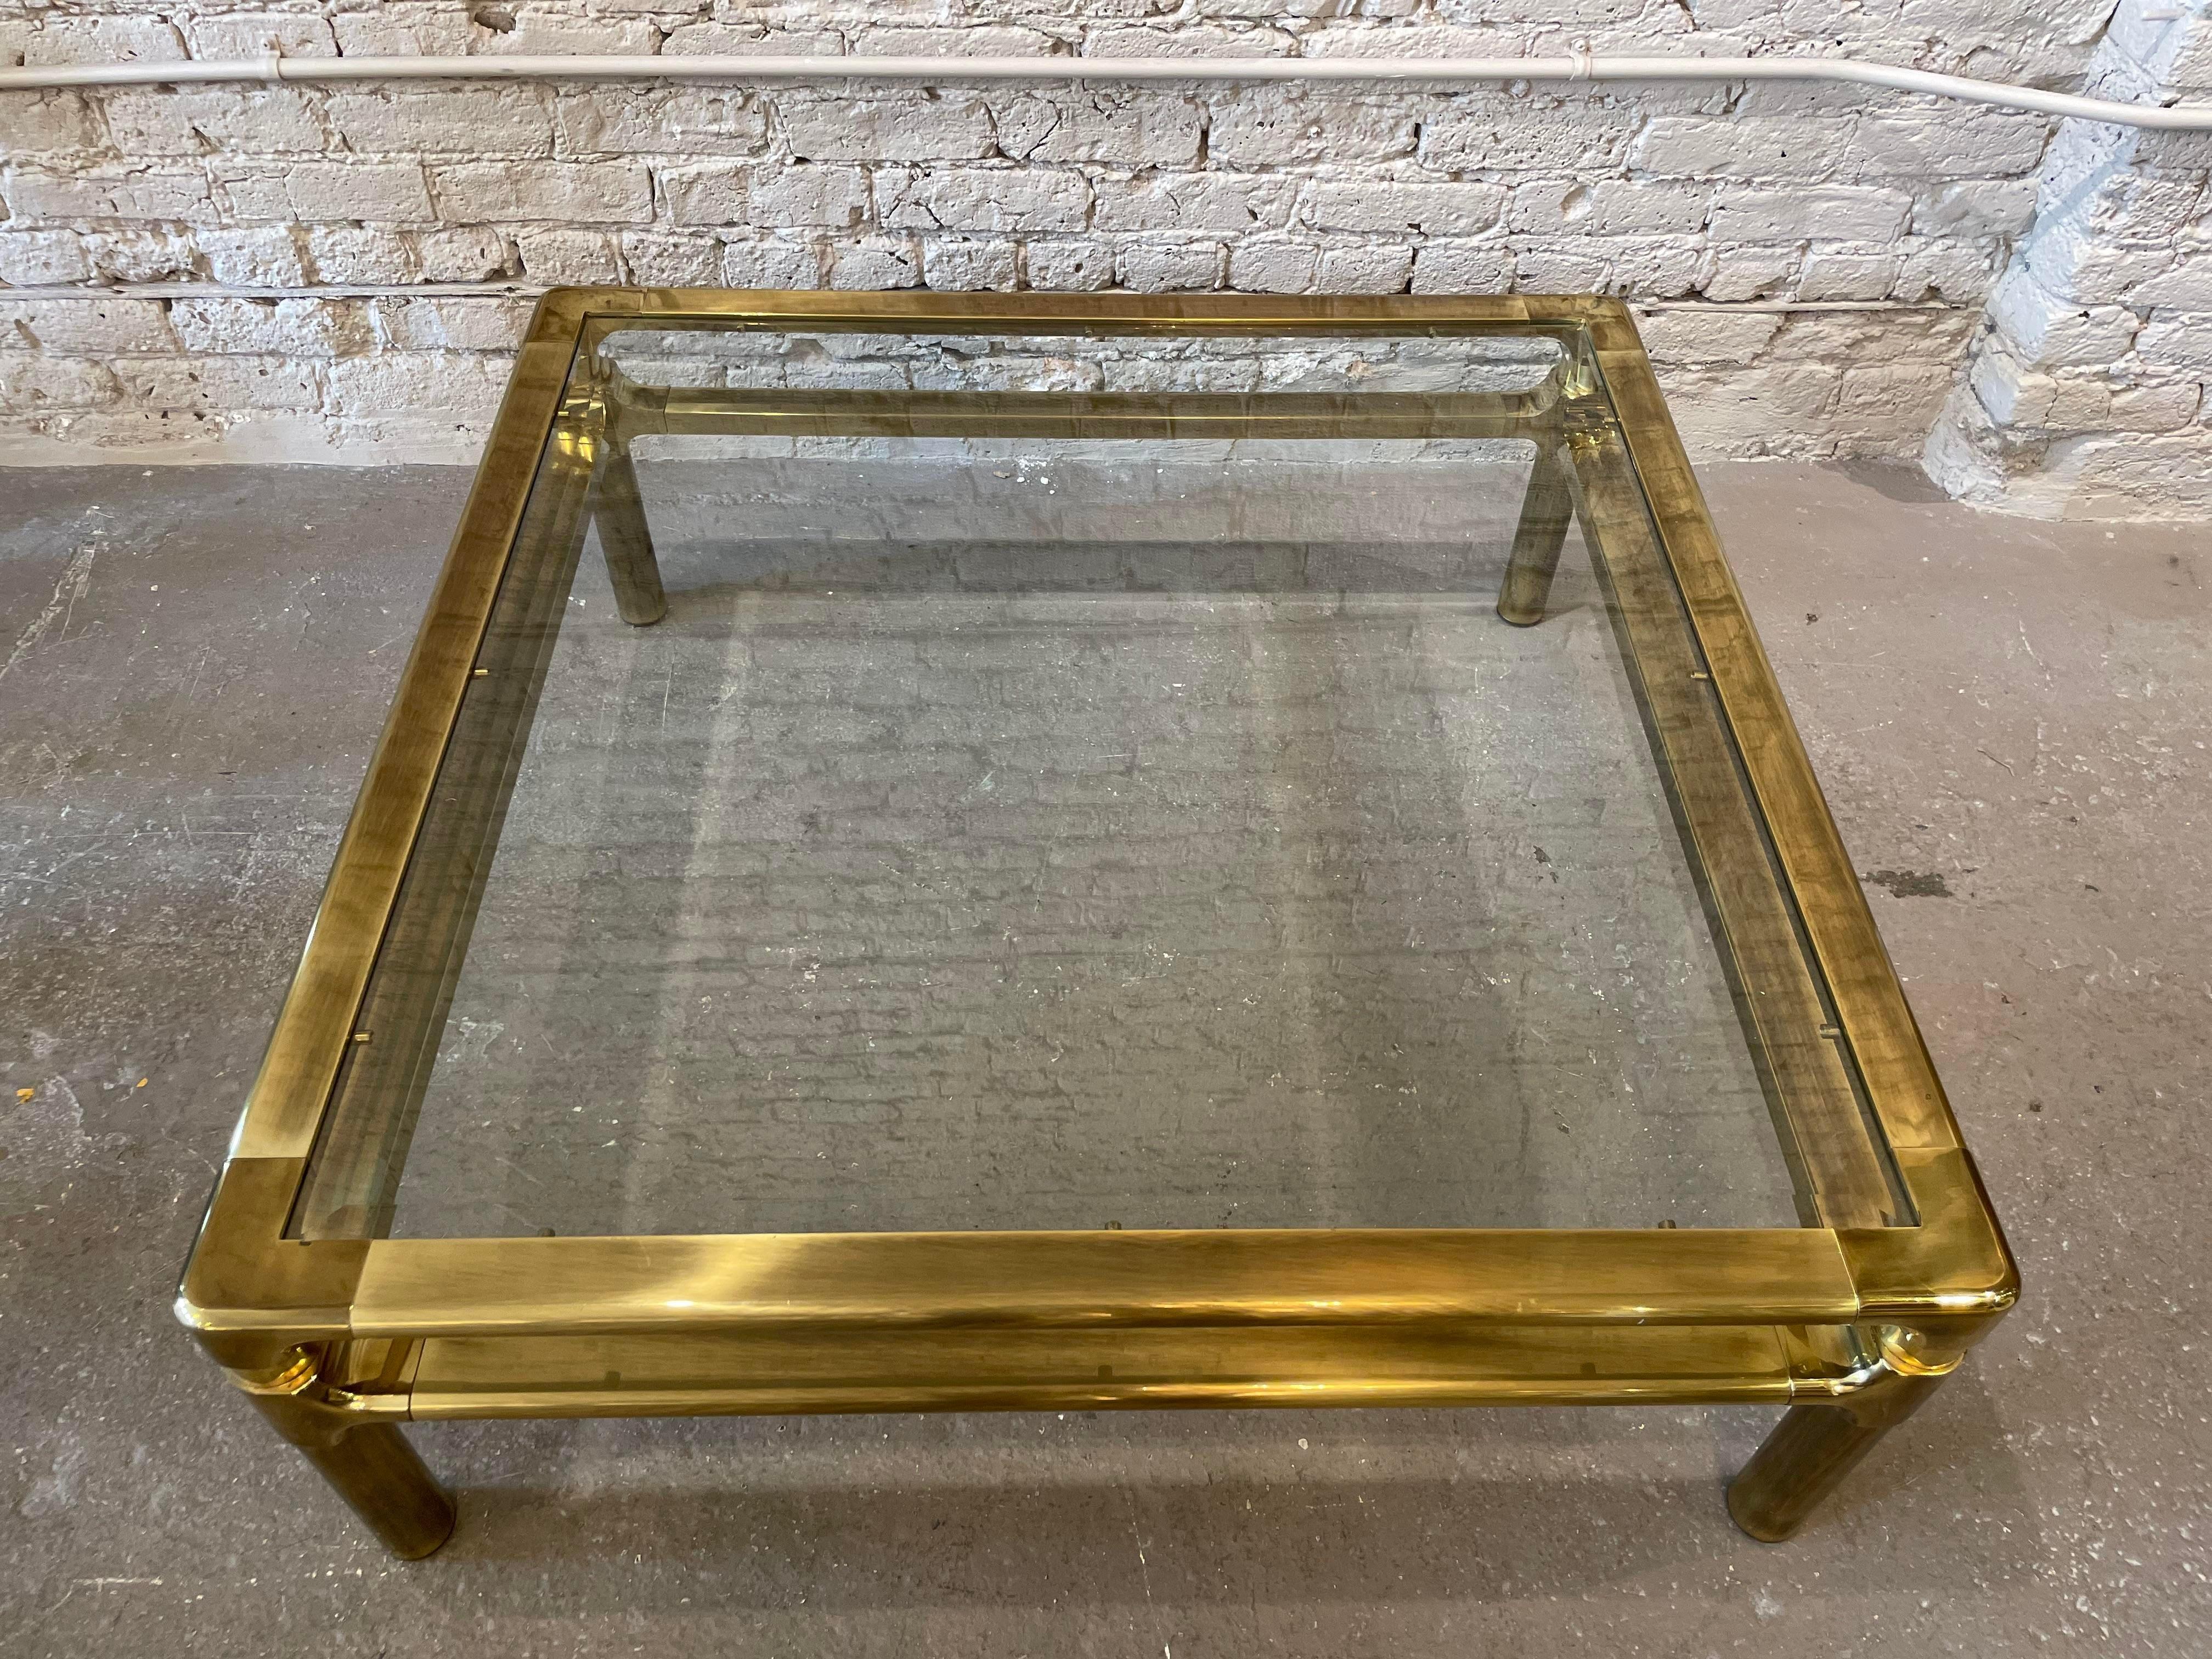 The brass is beyond! The table is simply stunning. The brass has the right amount of weight and patina but isn’t oxidized or rusted. The original glass is in good condition - no chips. A truly beautiful piece.
